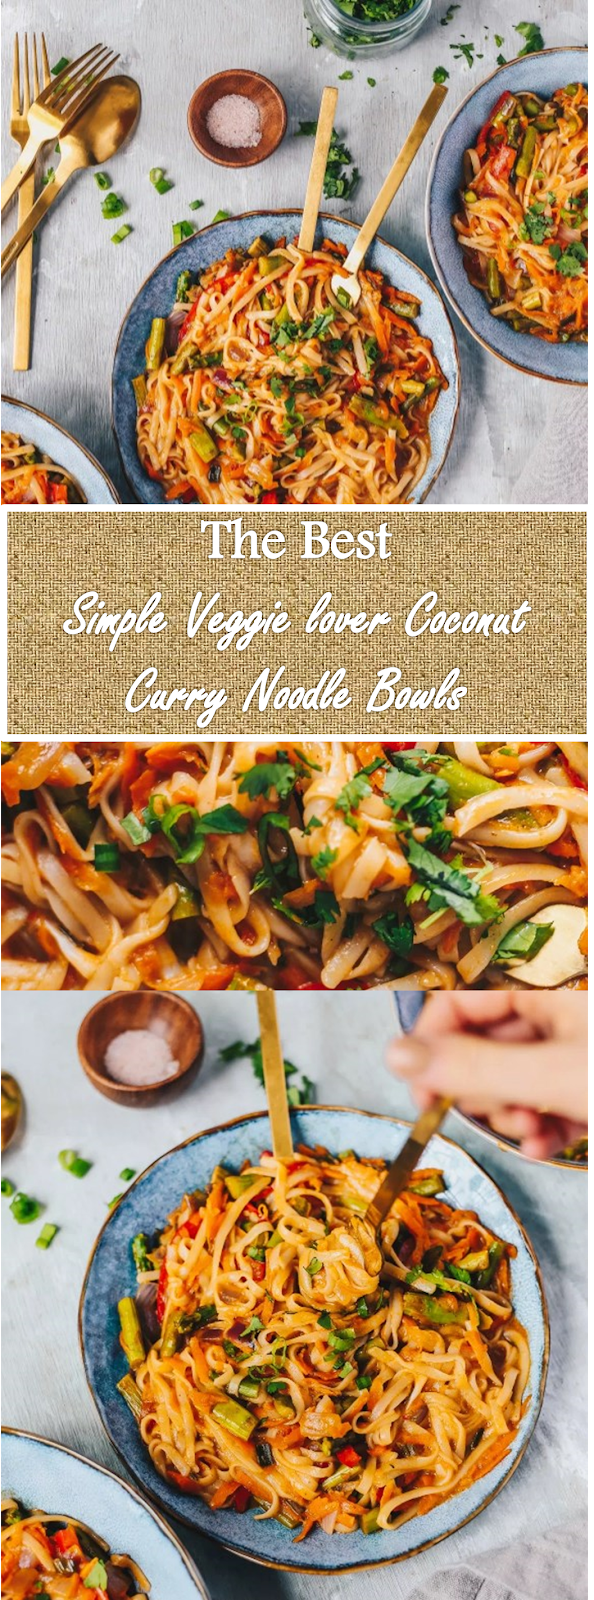 427 Reviews: #Best #Recipe >>> Simple #Veggie lover #Coconut #Curry # ...